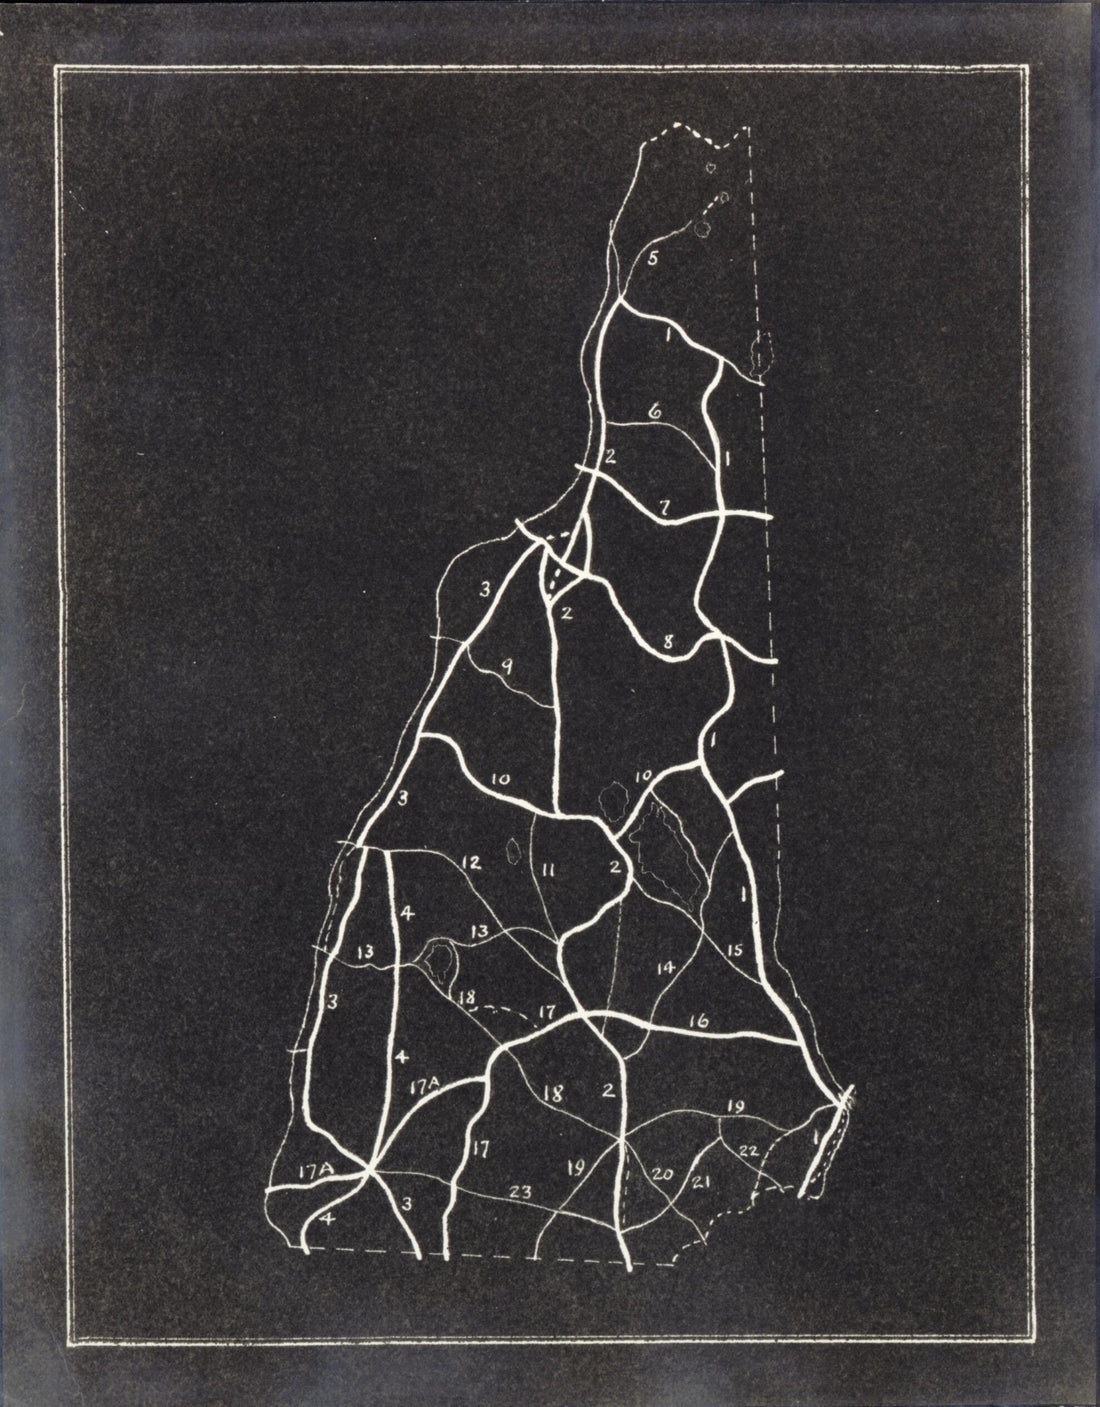 This old map of Collection of Maps Relating to Publication of New Hampshire, a Guide to the Granite State by Federal Writers&